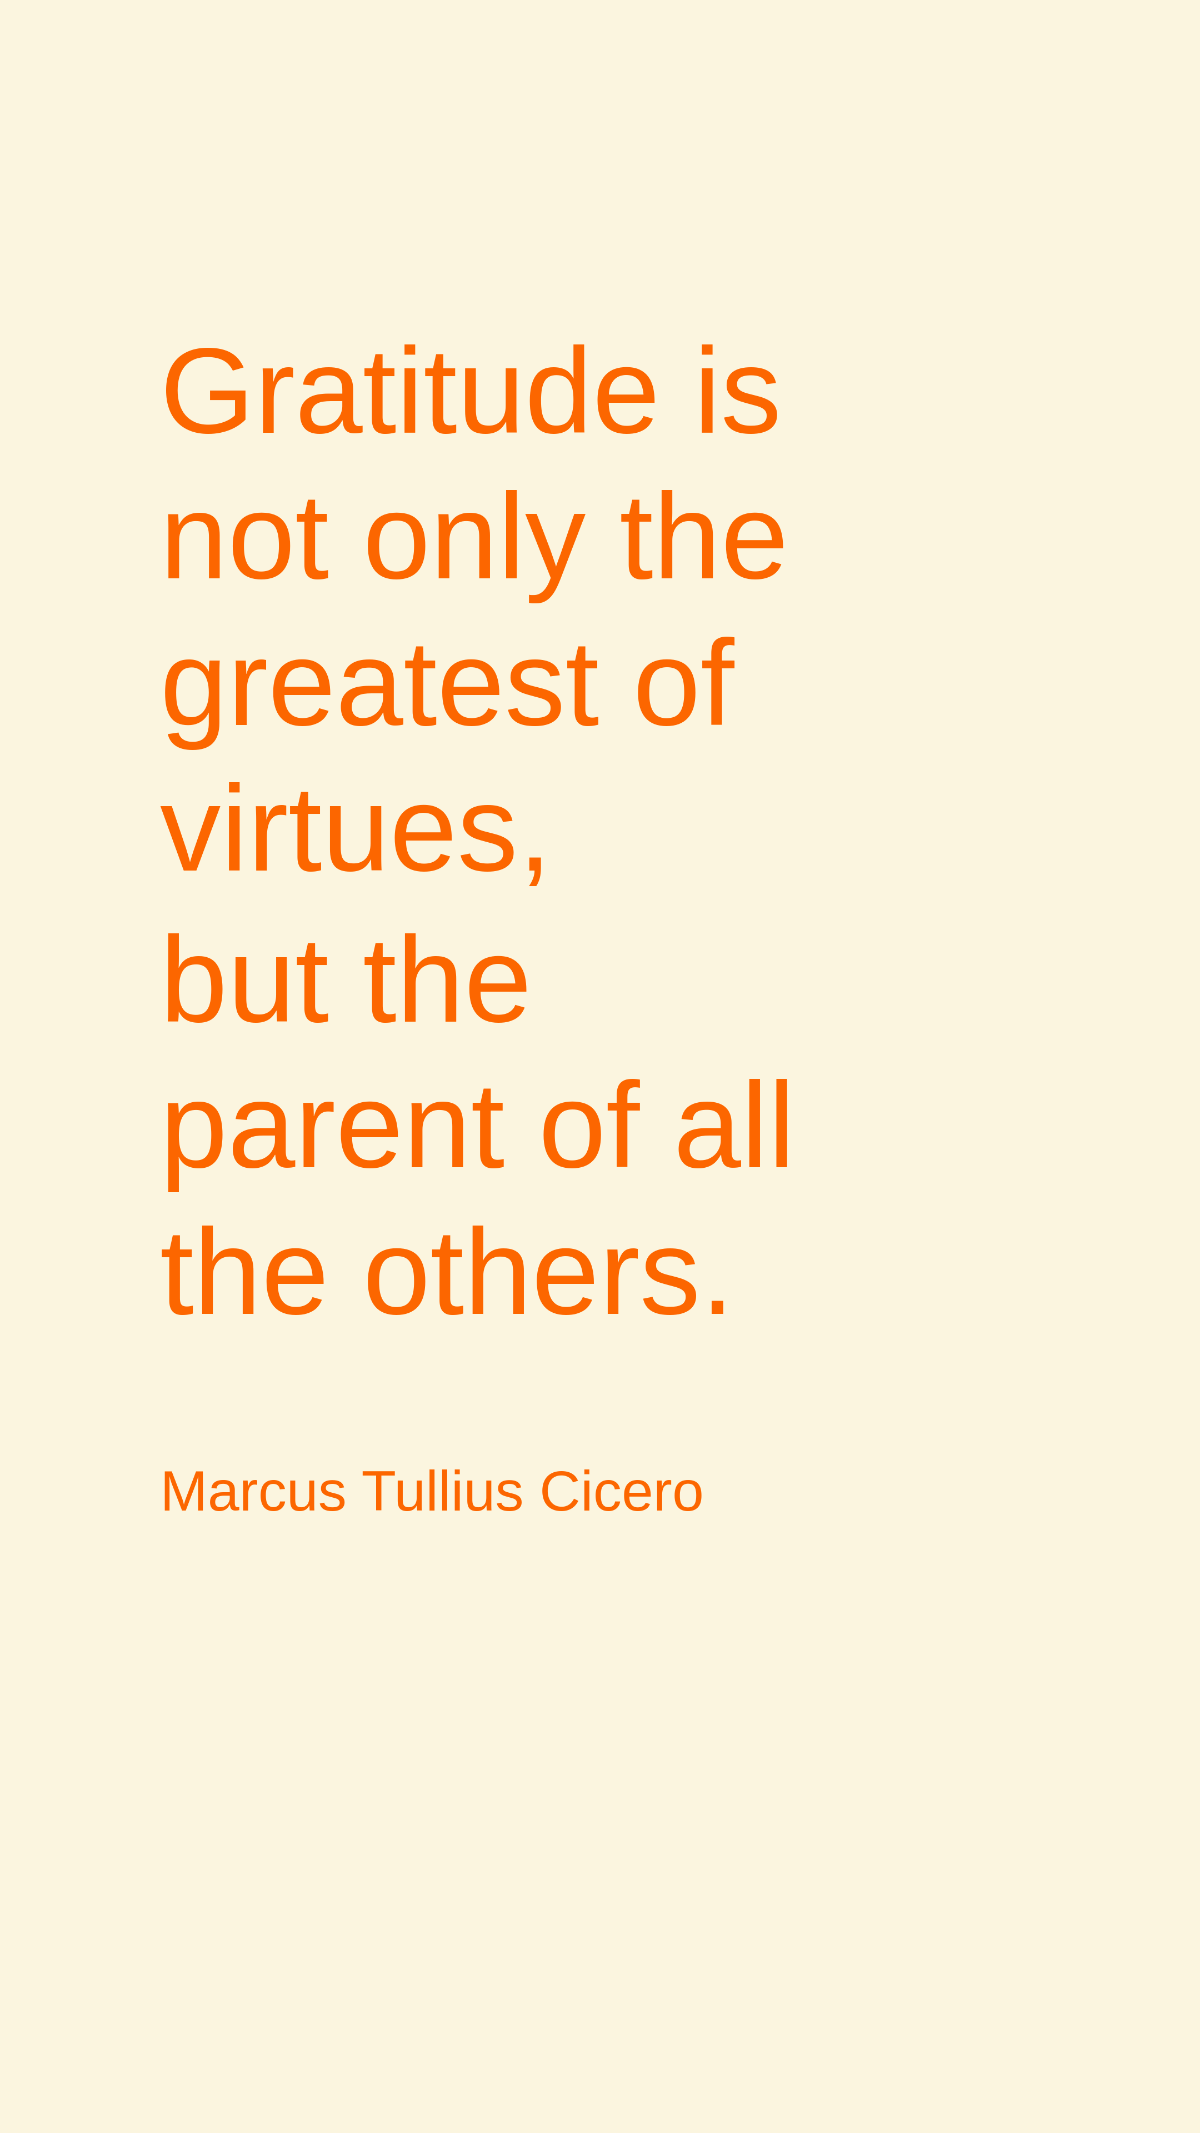 Marcus Tullius Cicero - Gratitude is not only the greatest of virtues, but the parent of all the others. Template